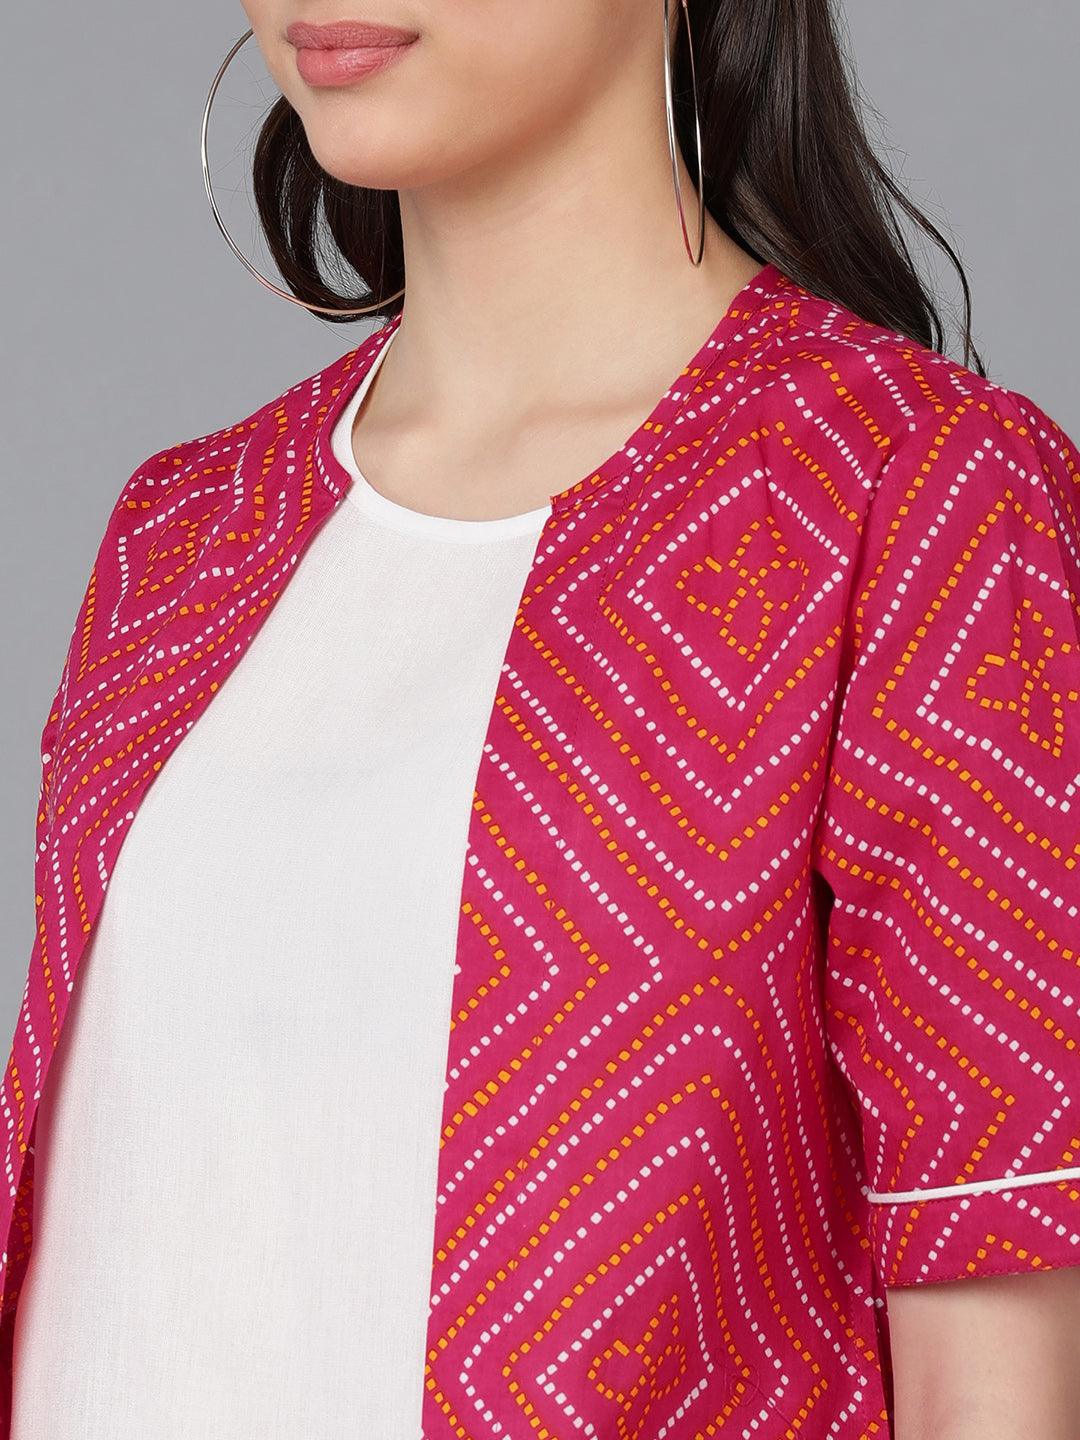 Solid White Dress With Bhandhani Printed Jacket - Znxclothing